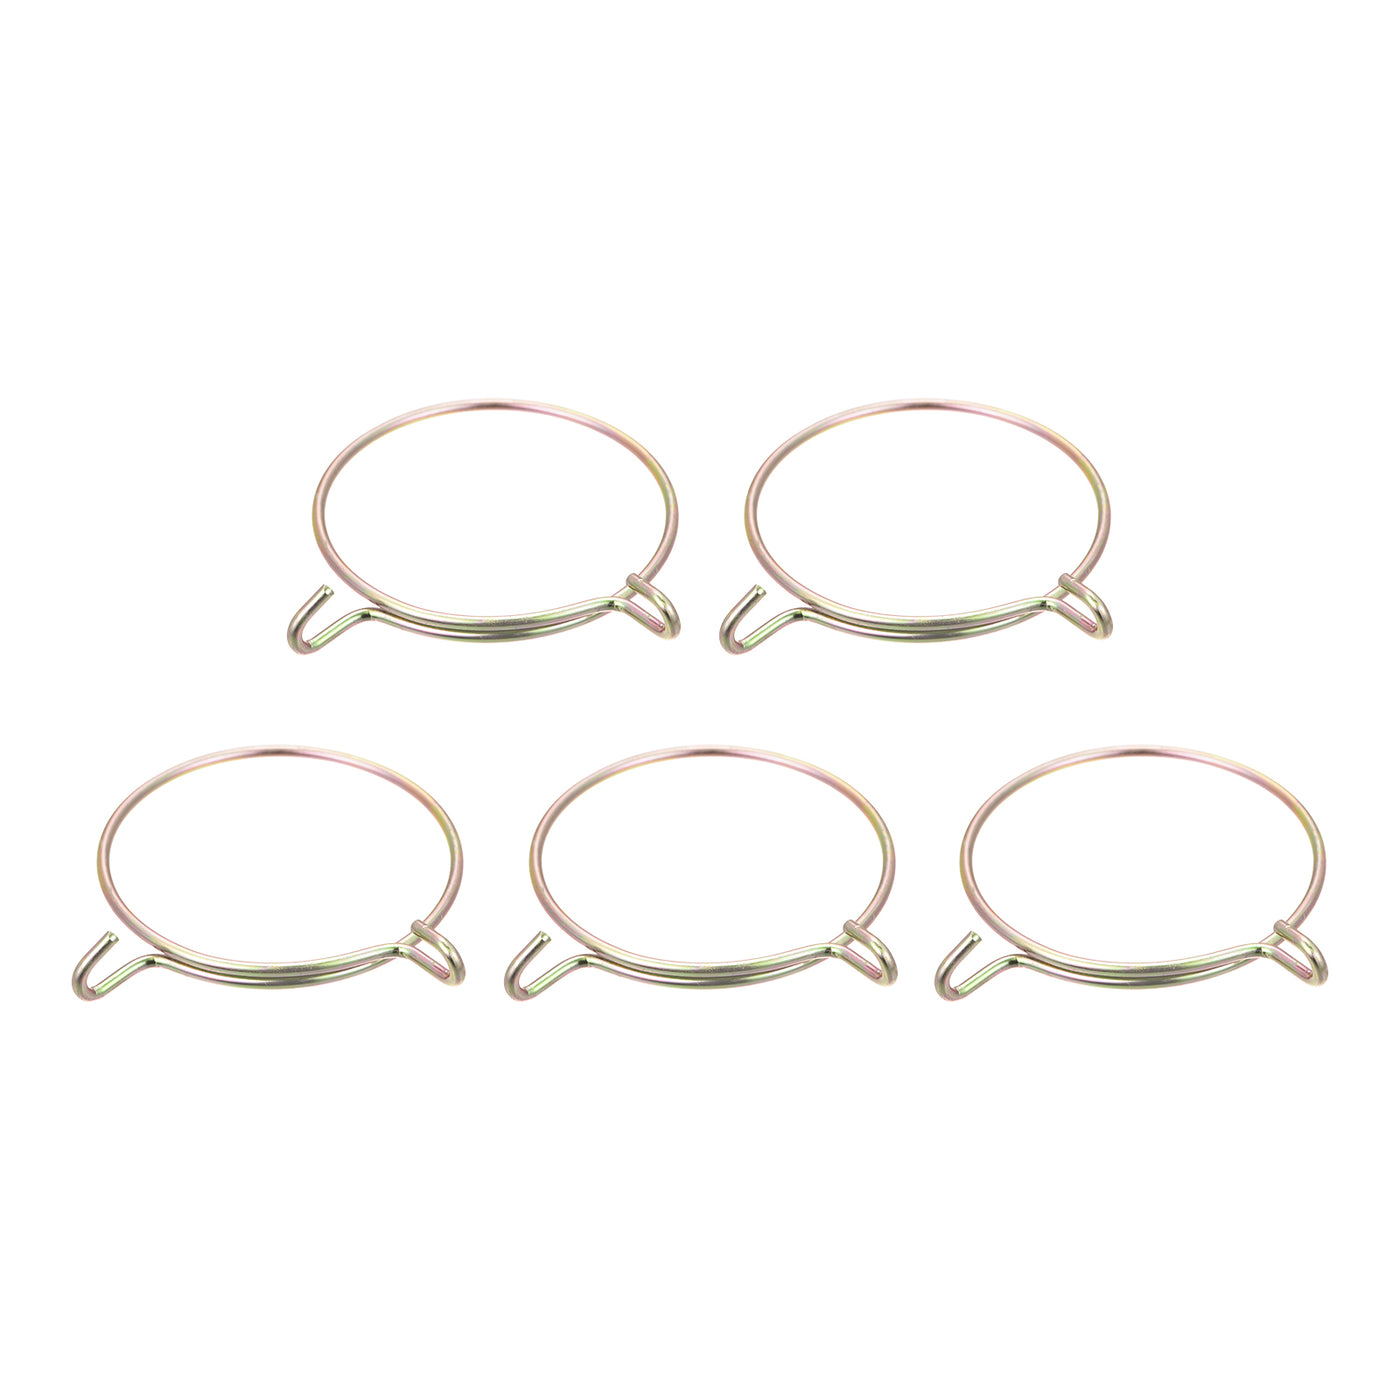 Uxcell Uxcell Fuel Line Hose Clips, 5pcs 50mm 65Mn Steel Tubing Spring Clamps